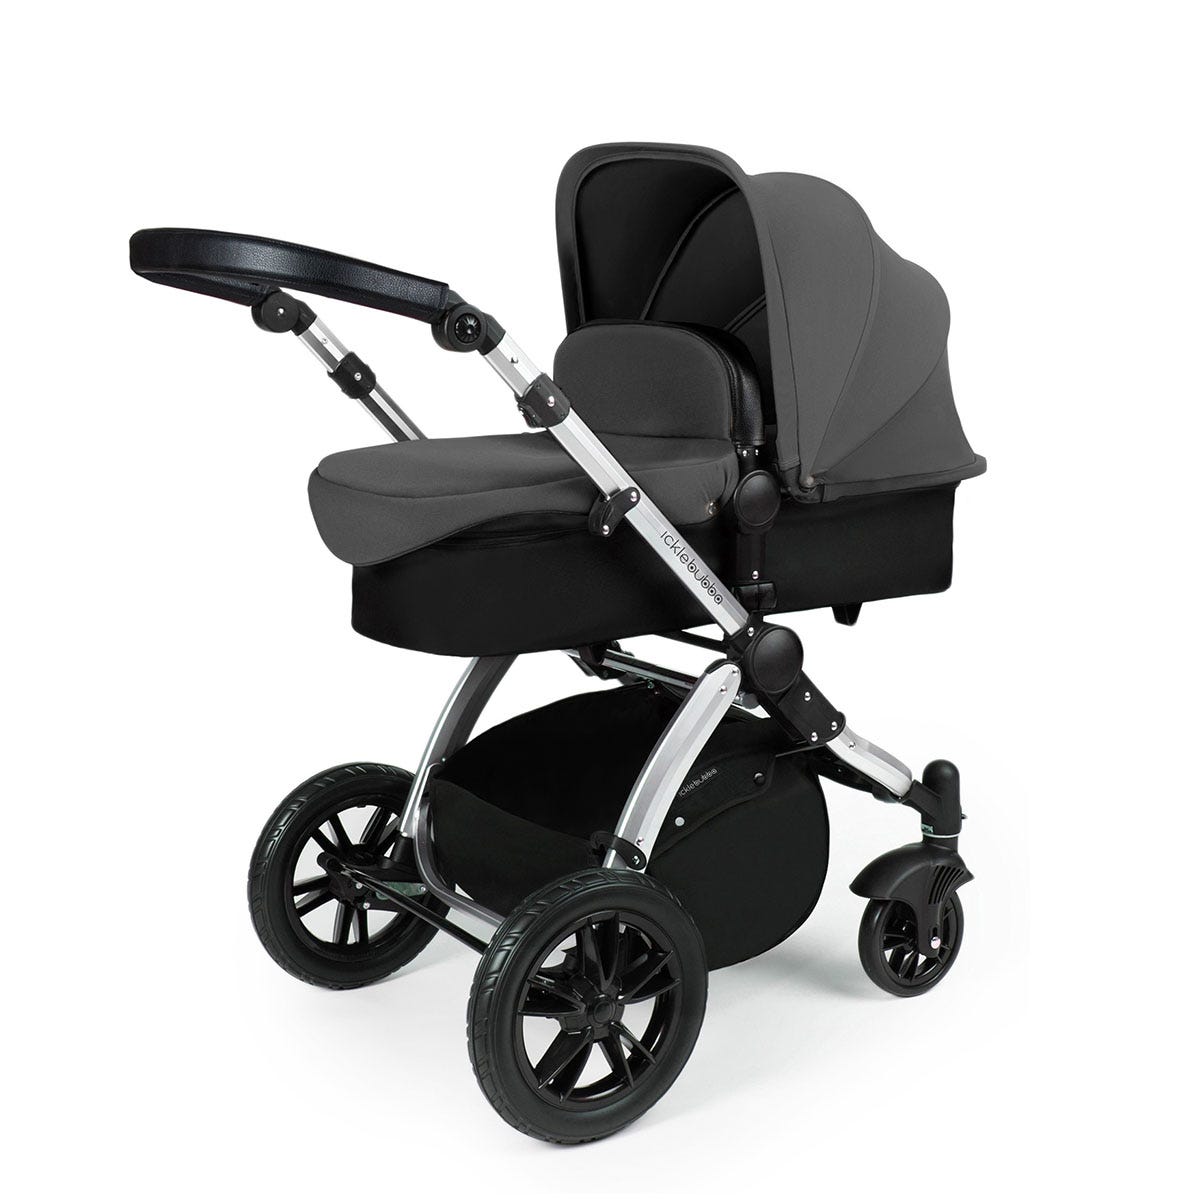 Ickle Bubba Stomp V3 2 in 1 Pushchair - Graphite Grey on Silver with Black Handles